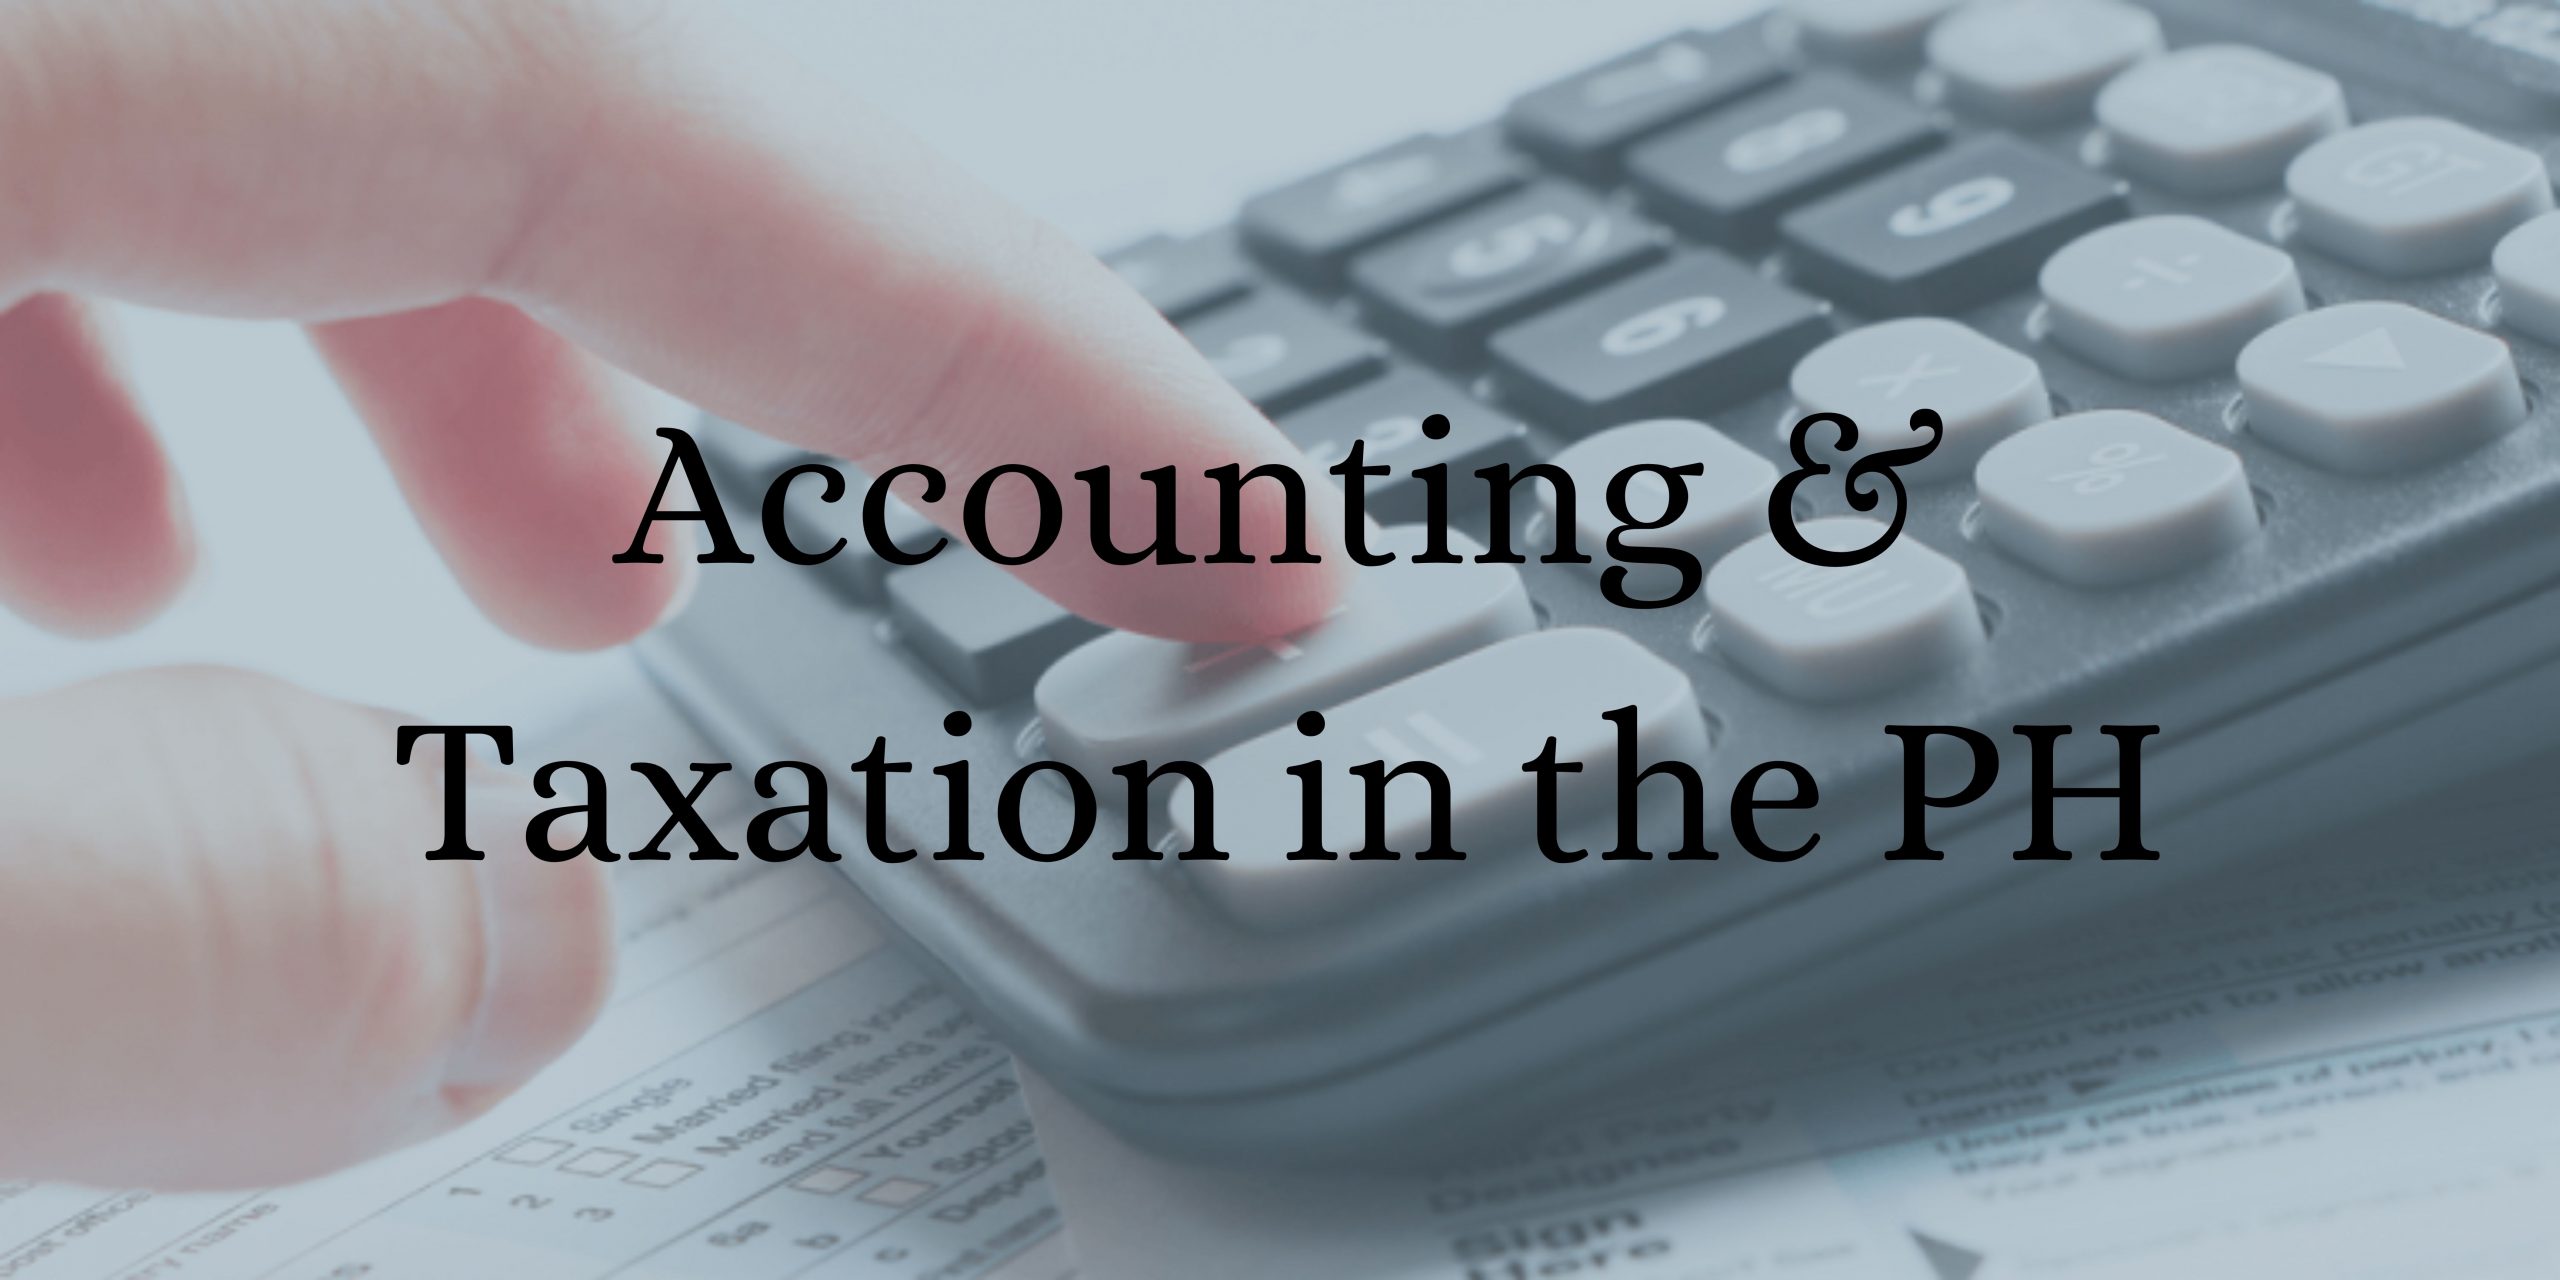 Accounting & Taxation in PH